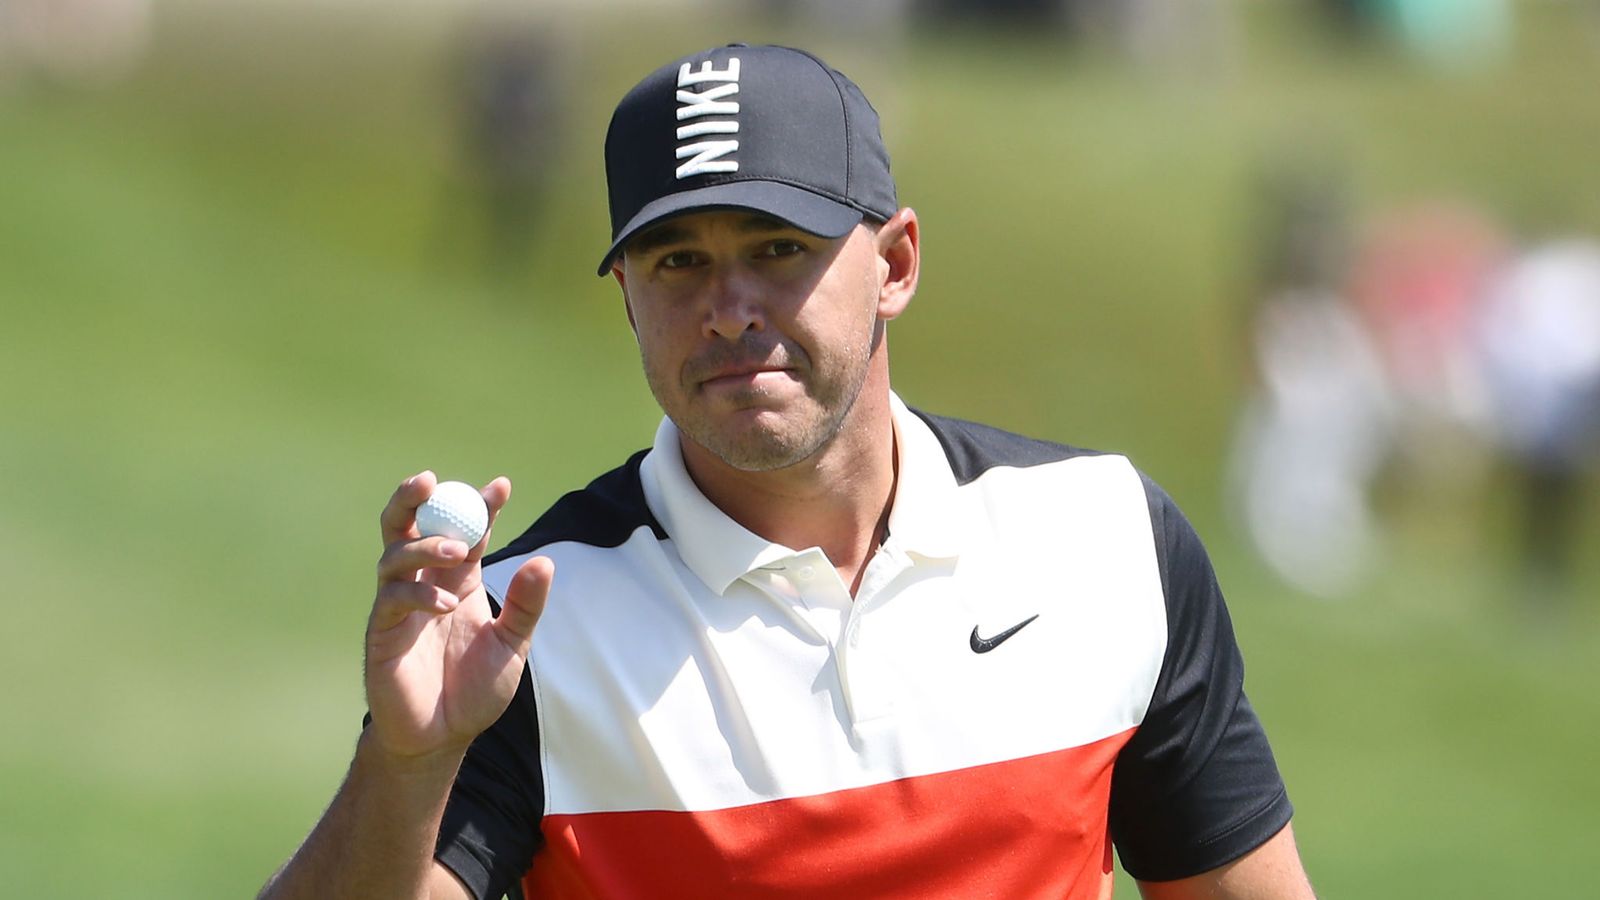 US Open Preview: Rory McIlroy, Tiger Woods, Dustin Johnson or another?